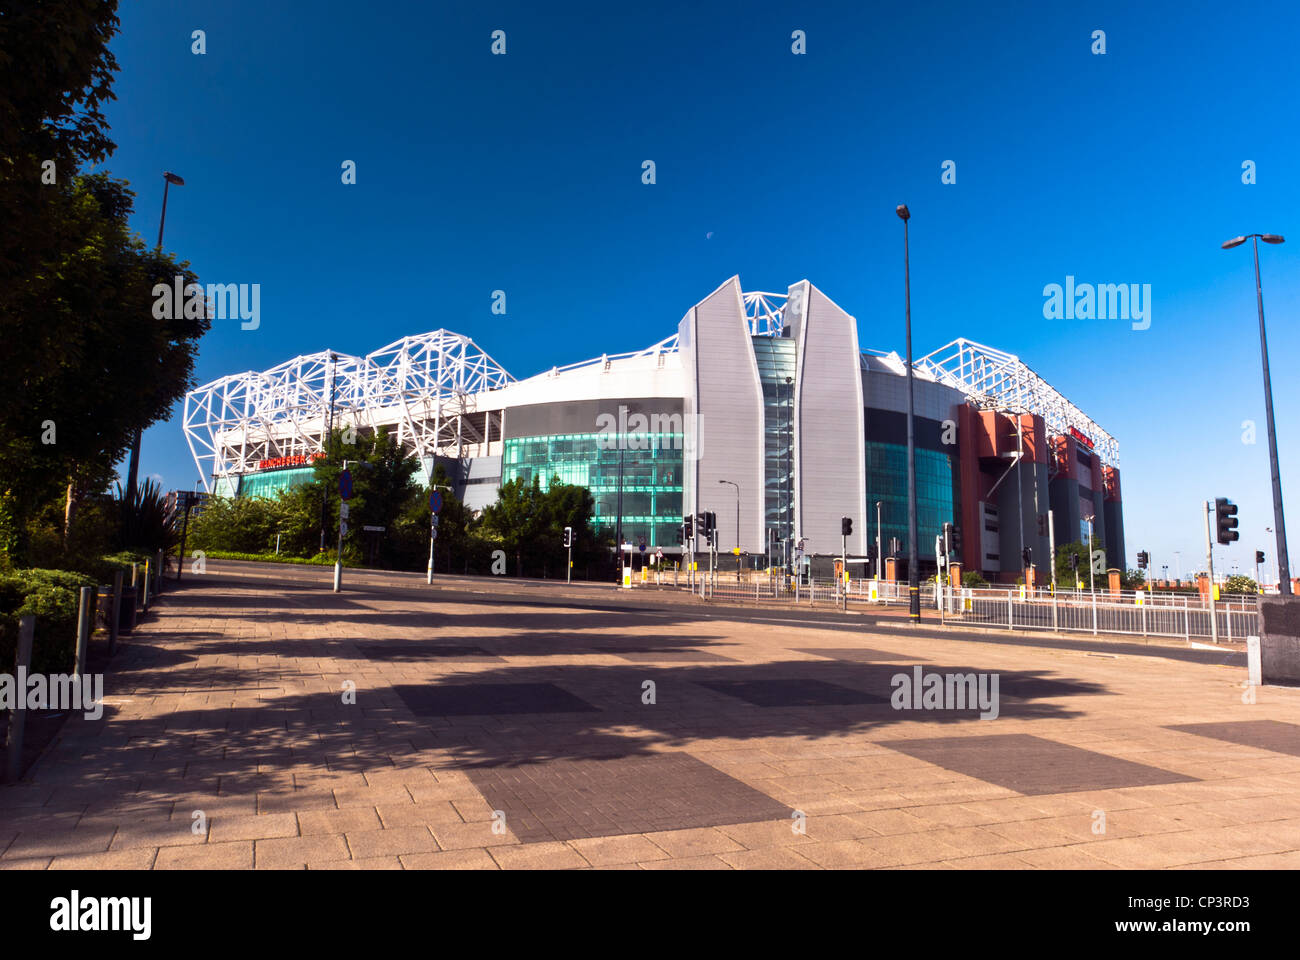 Manchester United Football ground "Old Trafford", Manchester, England, UK Stockfoto